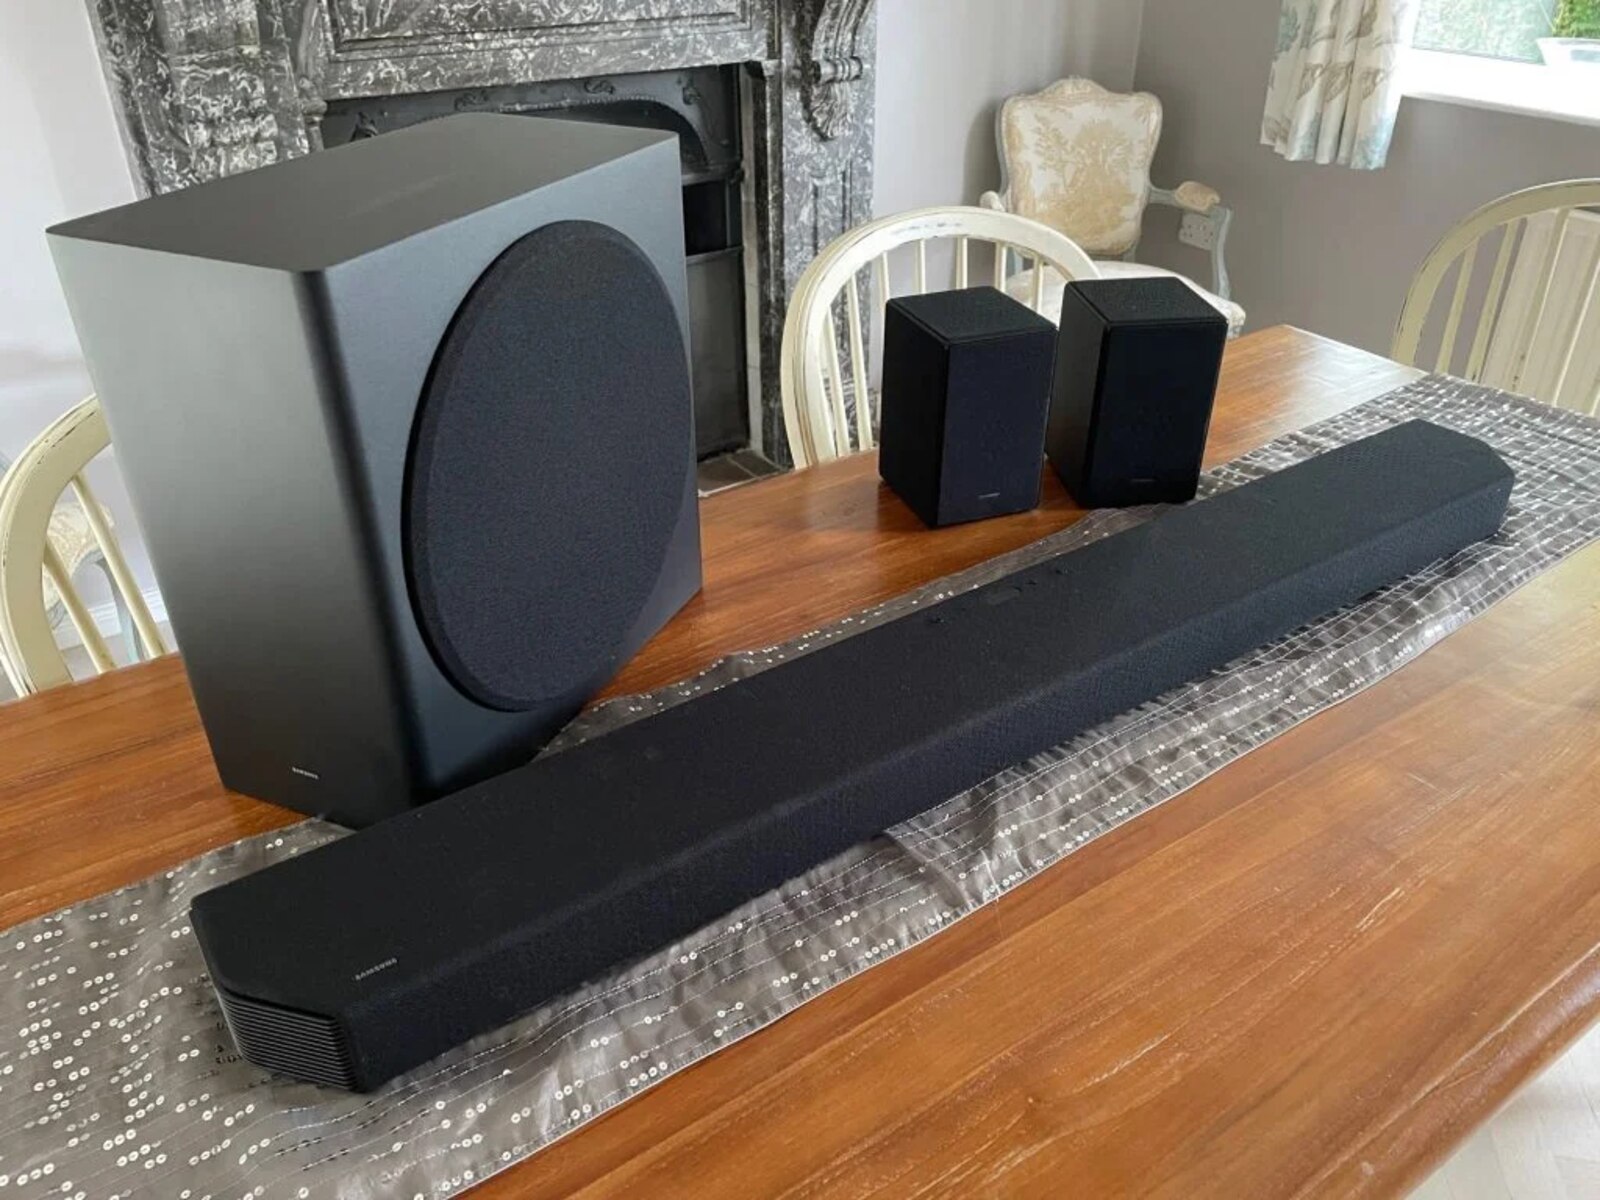 What To Upgrade First In Surround Sound System Speakers